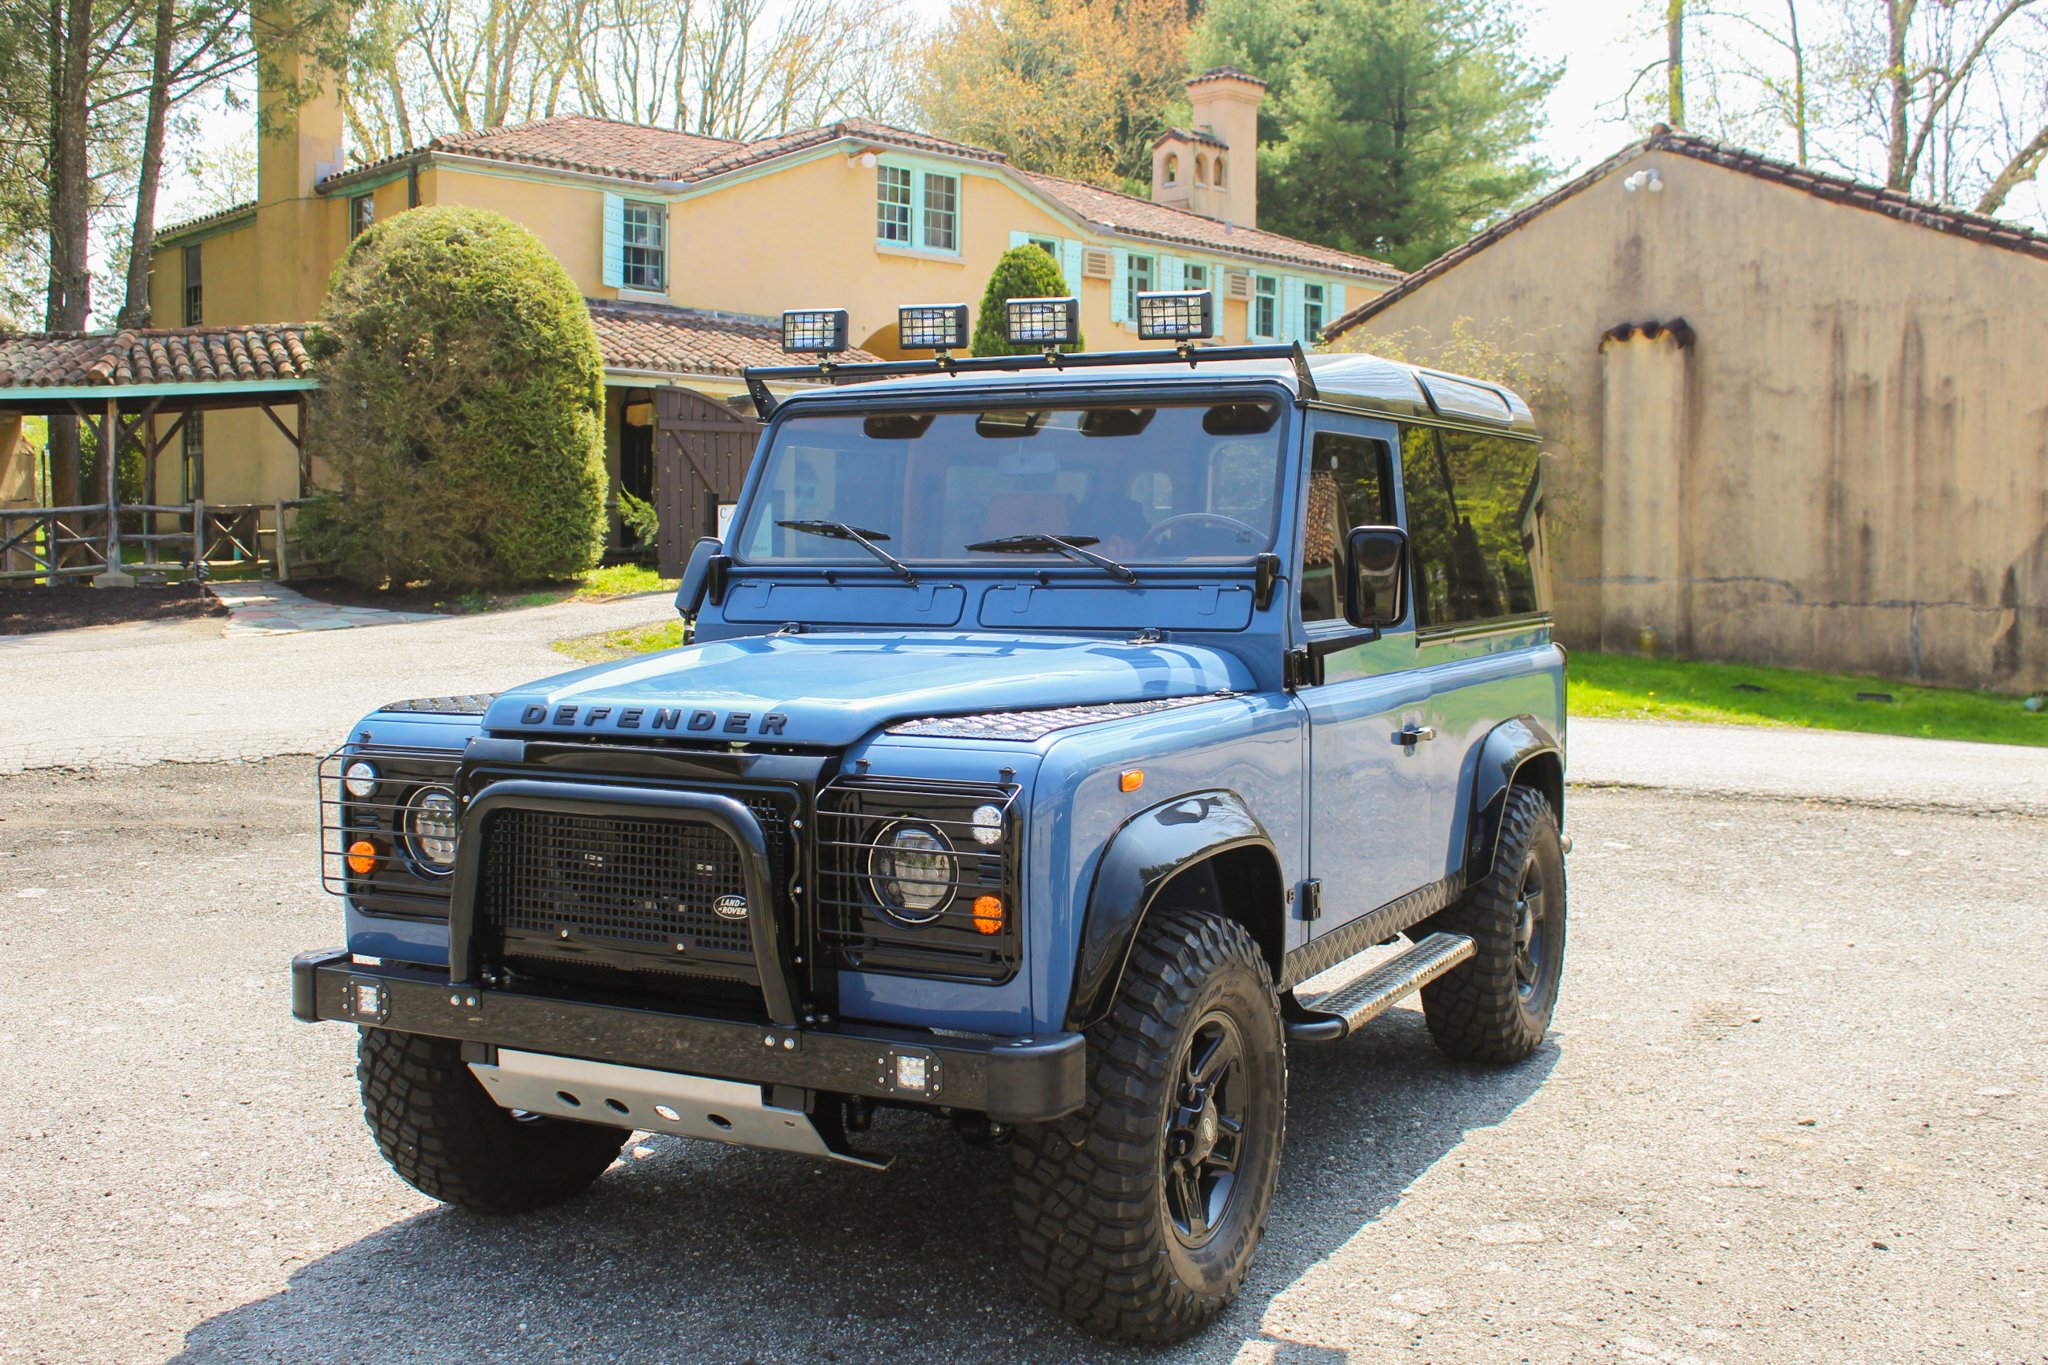 Our restored 1988 Land Rover Defender 90 is now available for sale, boasting a powerful 3.5L V8 engine with EFI and a luxurious Cognac leather interior with Recaro diamond-stitched seats.

#landrover #defender #d90 #defender90 #bespoke #truck #leathe